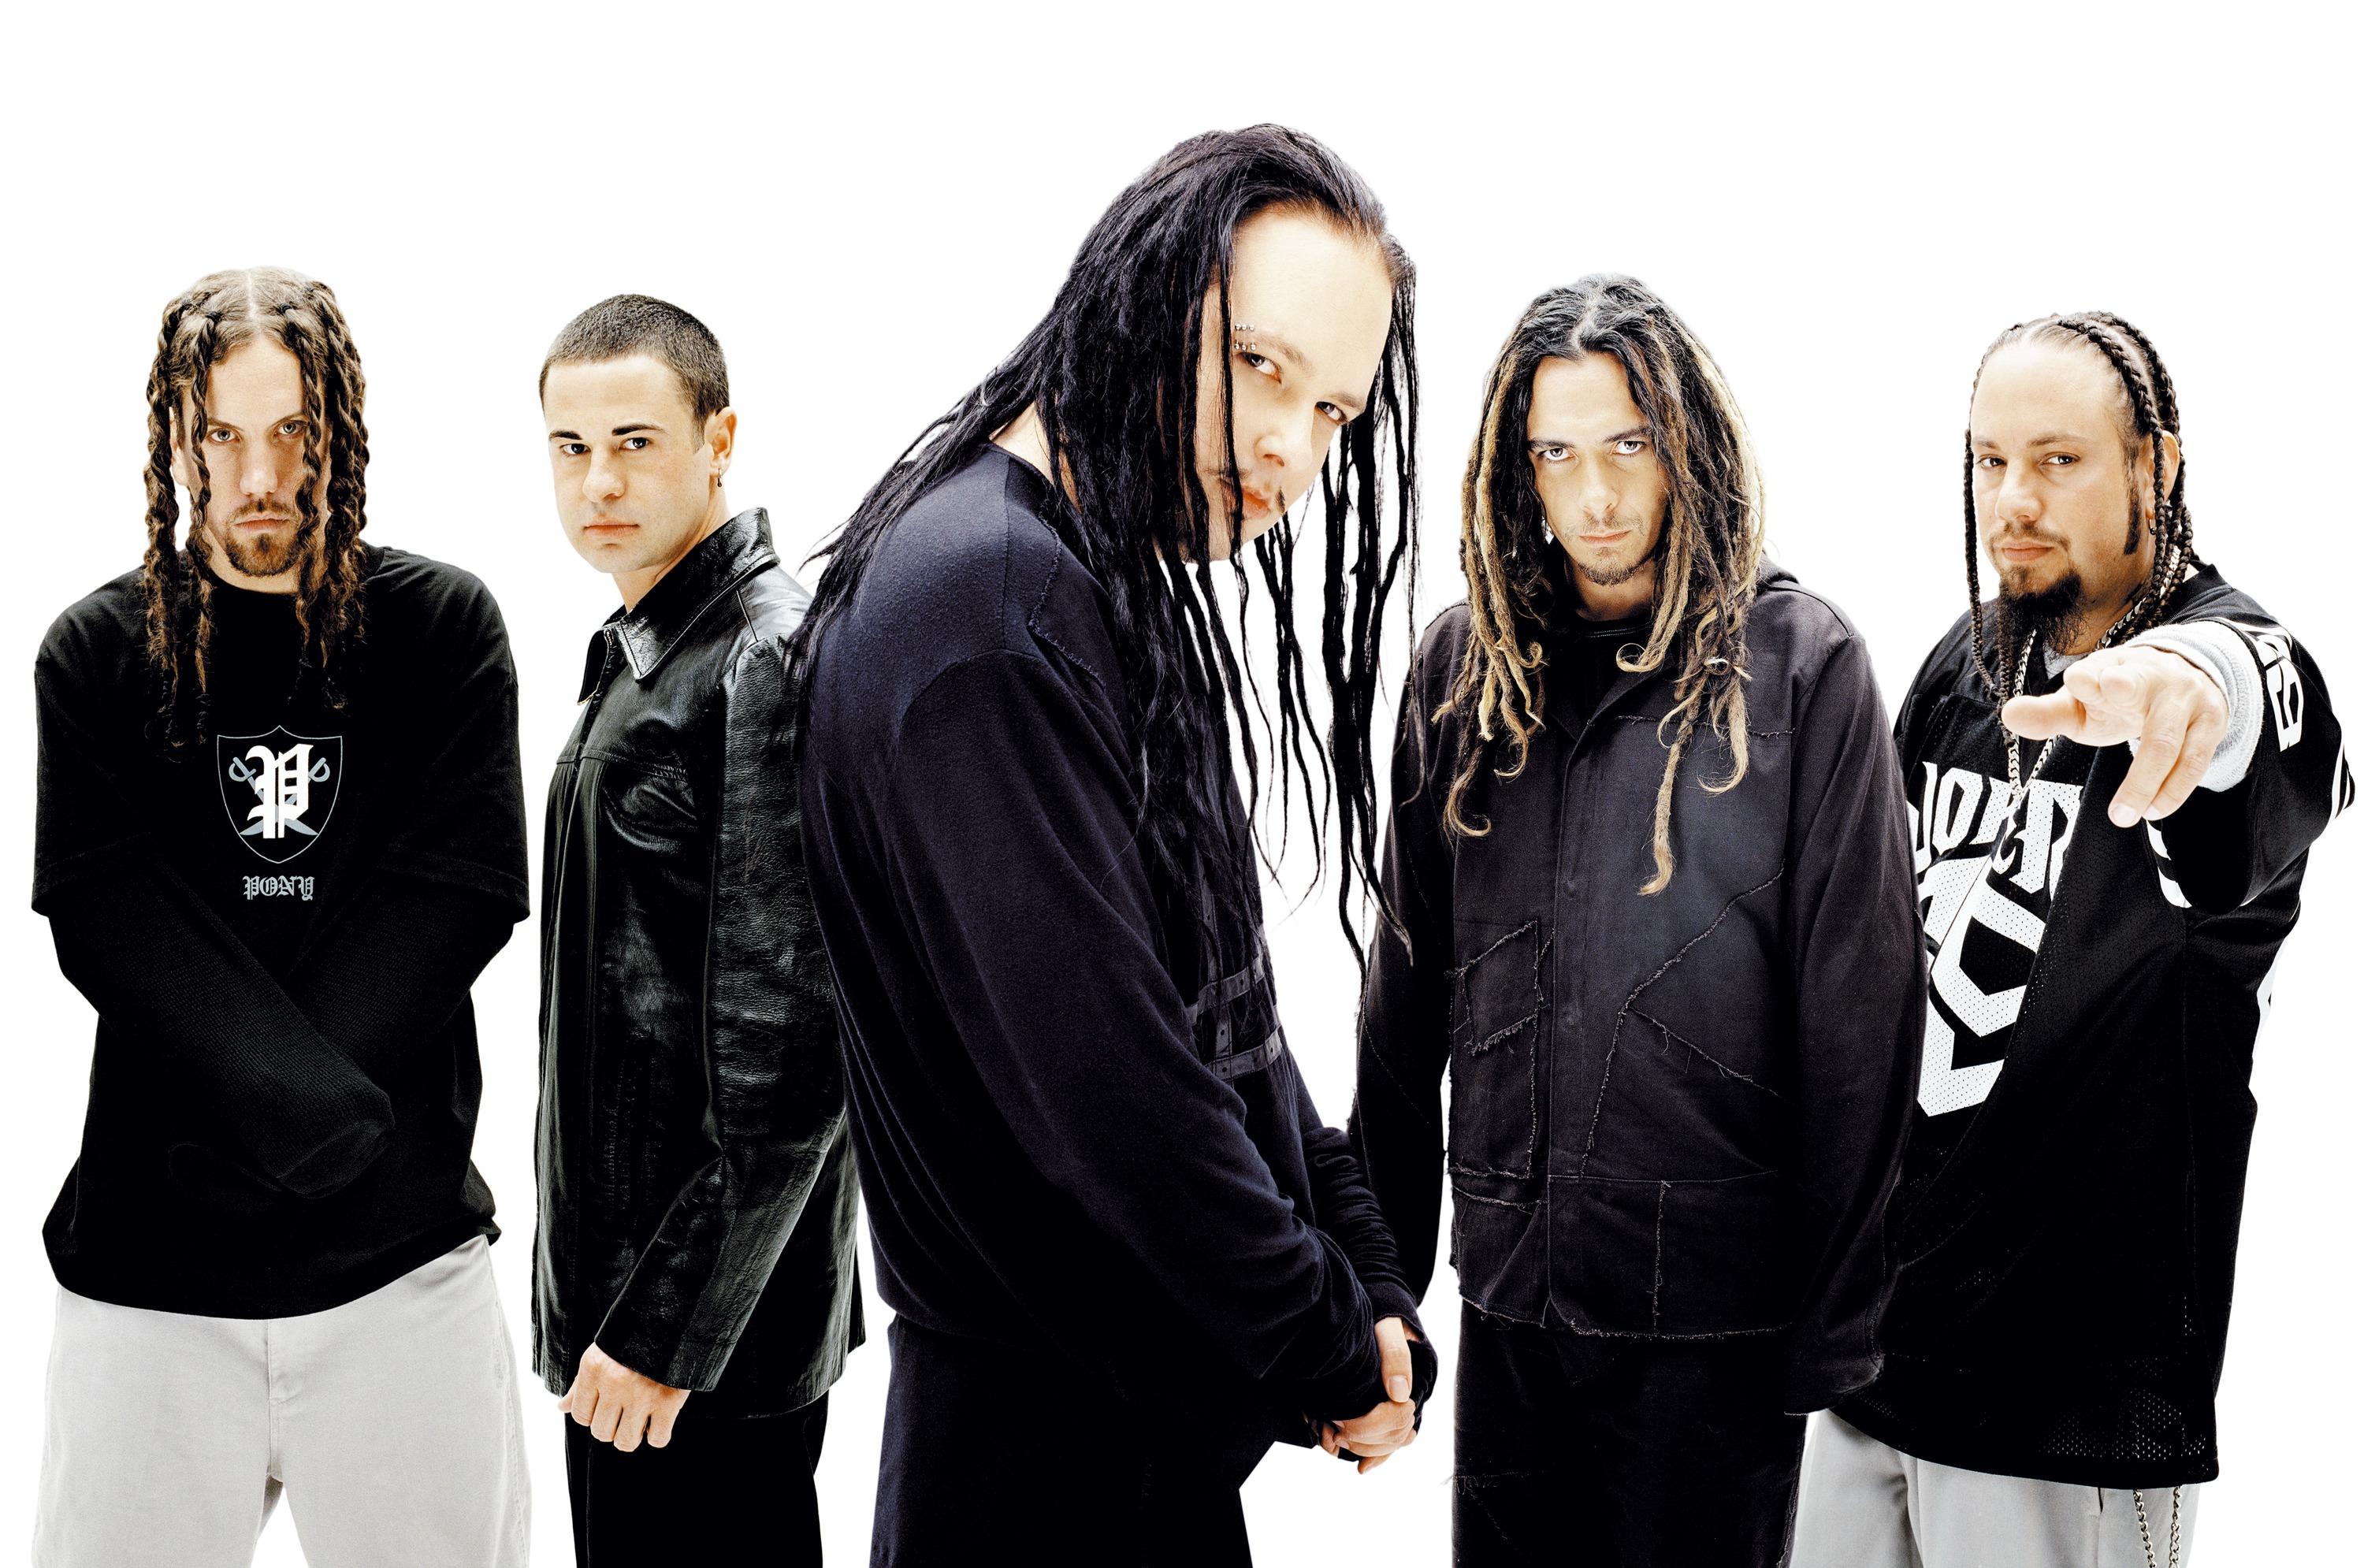 Korn Wallpaper Discover more Heavy Metal Korn Metal Band Metal Music  Music wallpaper httpswwwixpapcom  Rock poster art Rock band  posters Band posters